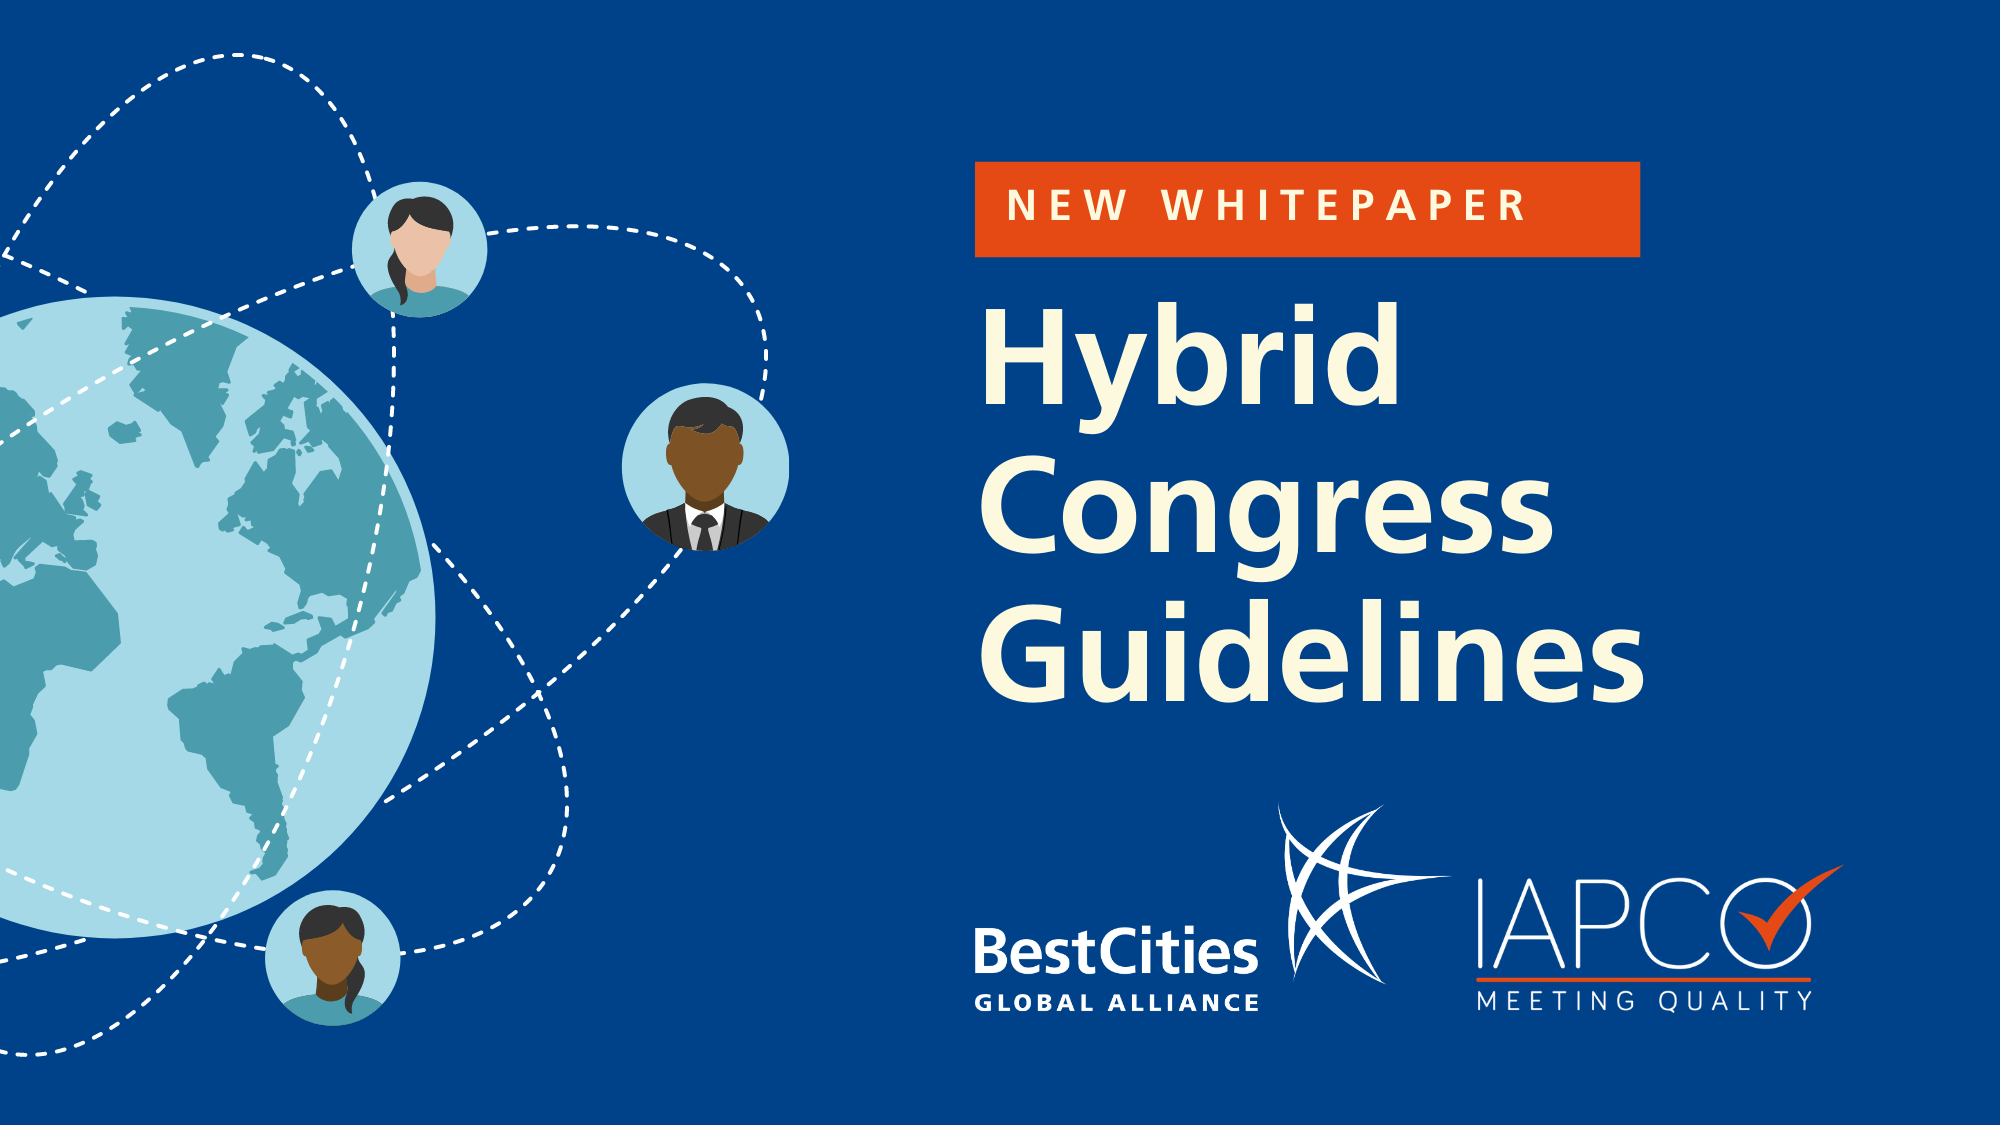 Hybrid Congress Guidelines Association success at the heart of